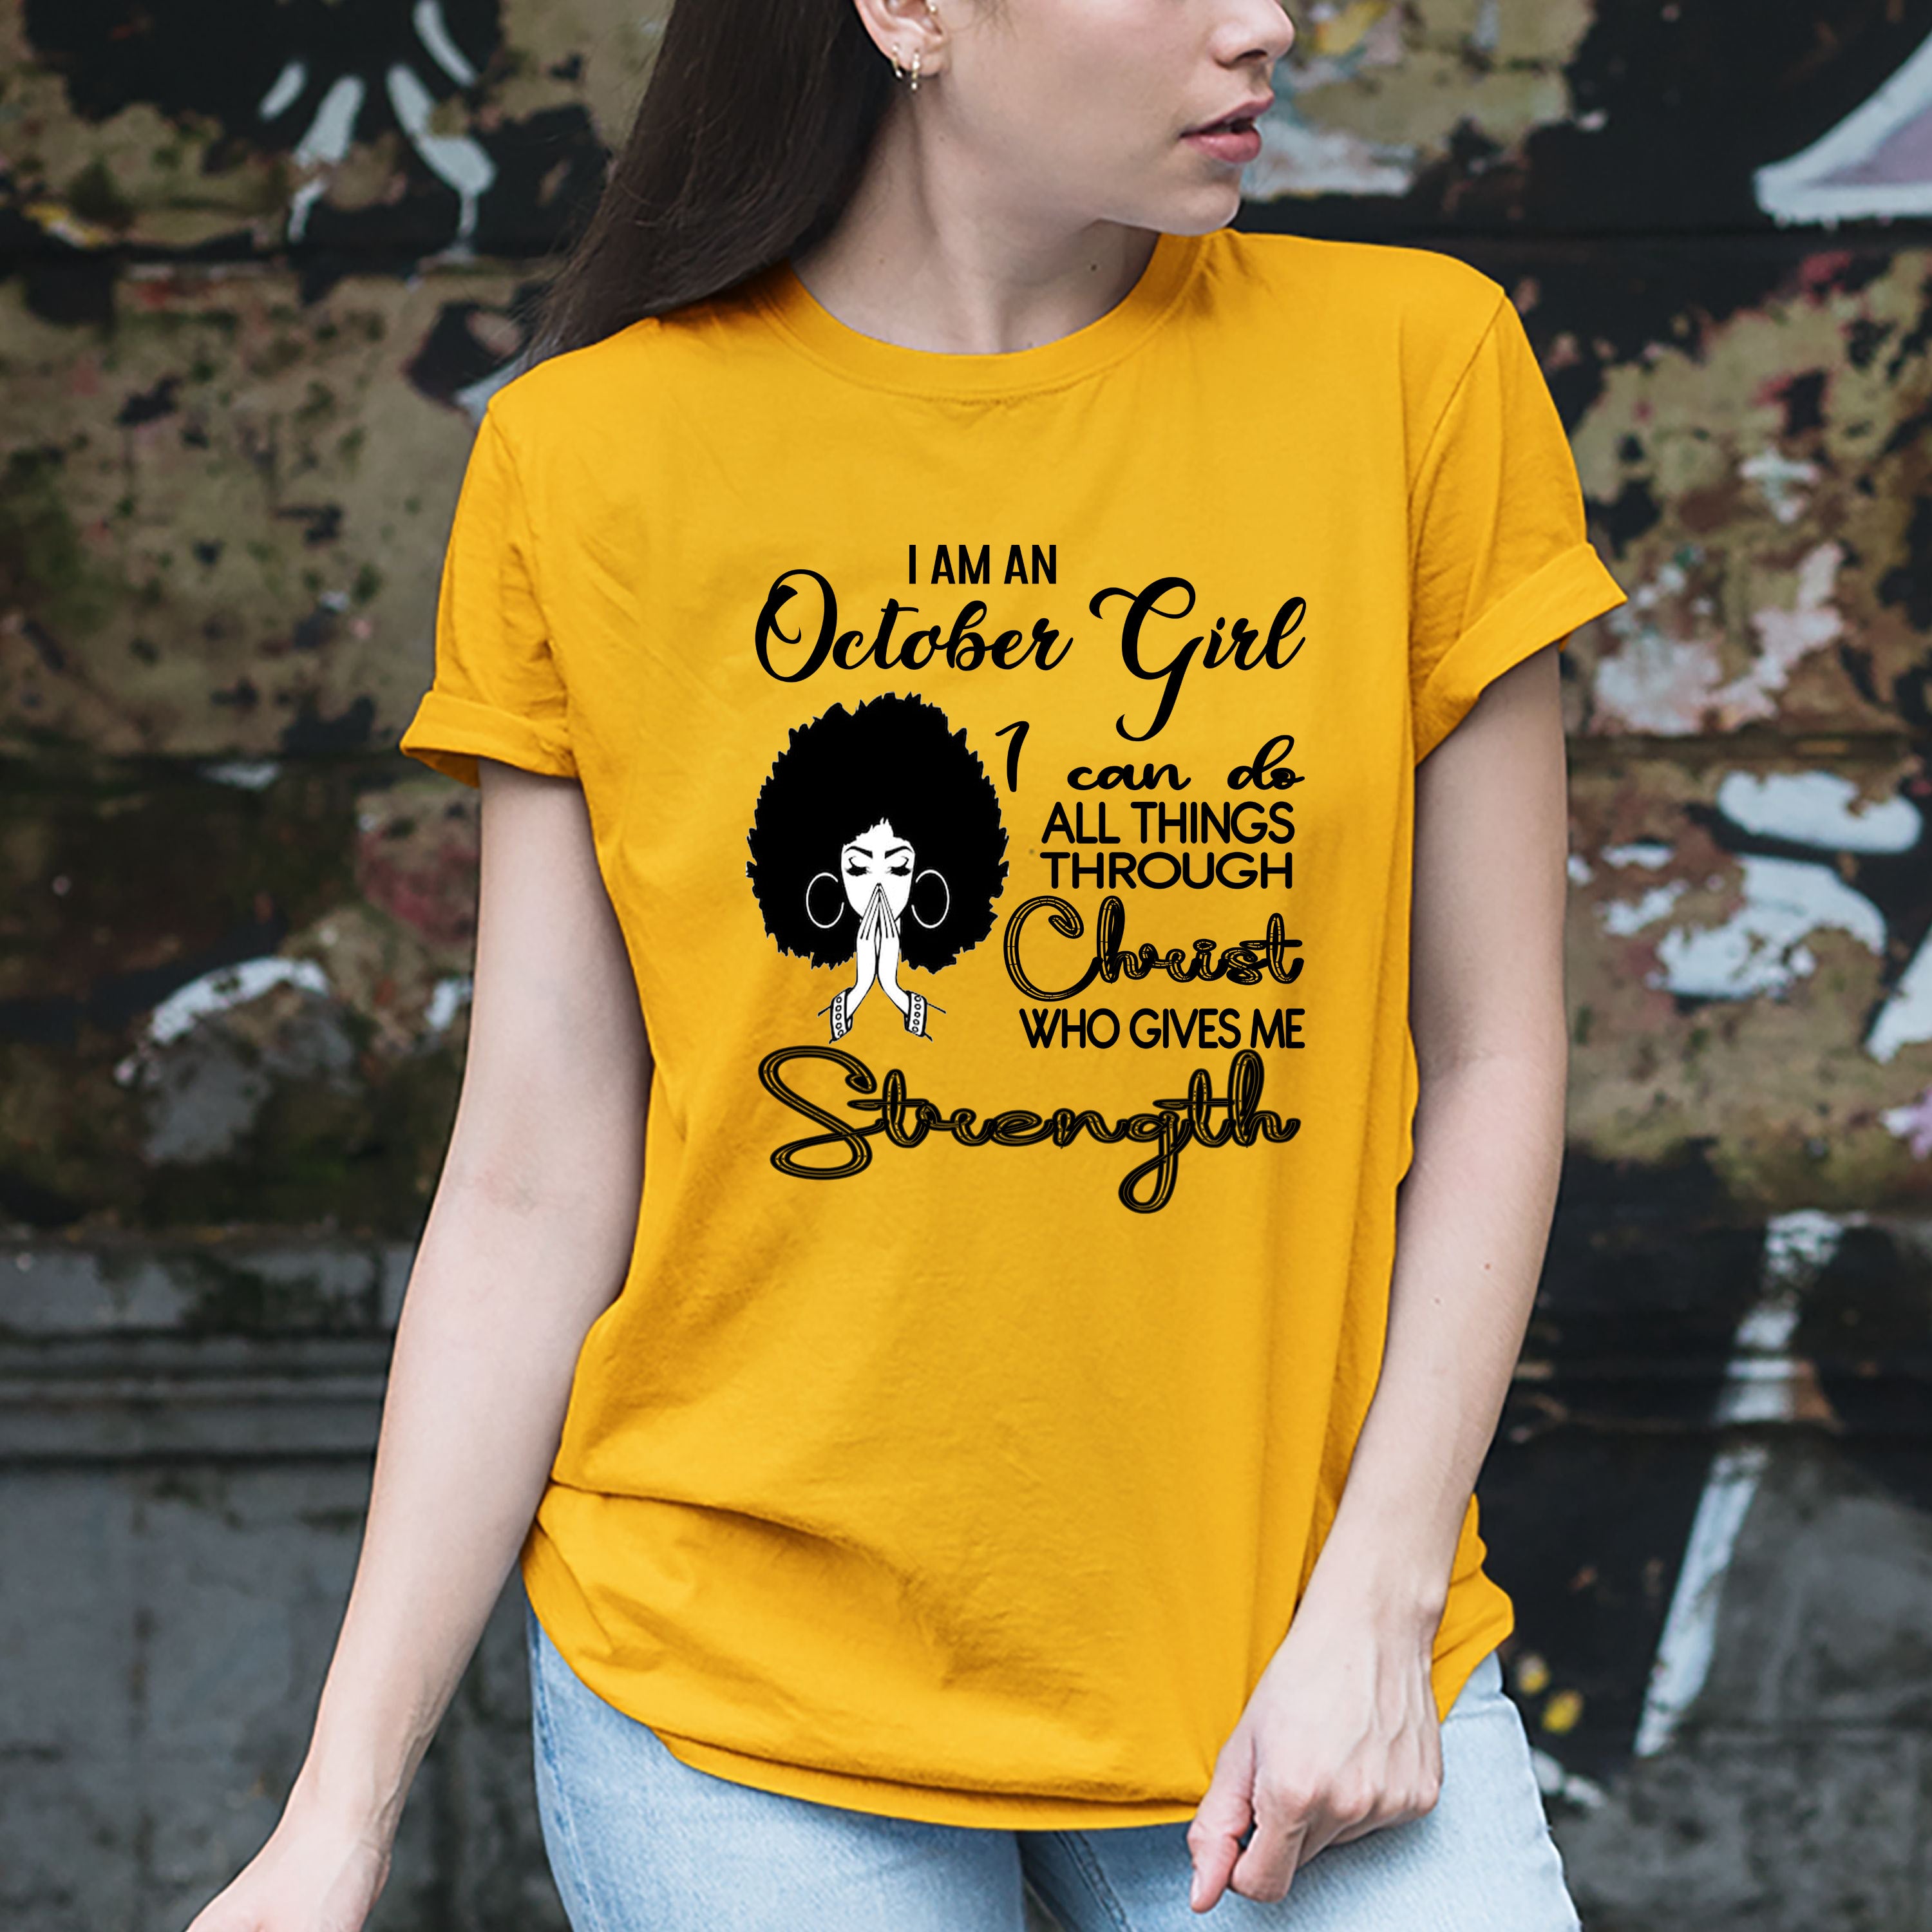 "OCTOBER GIRL Can Do All Things Through Christ Who Gives Me Strength",T-Shirt.